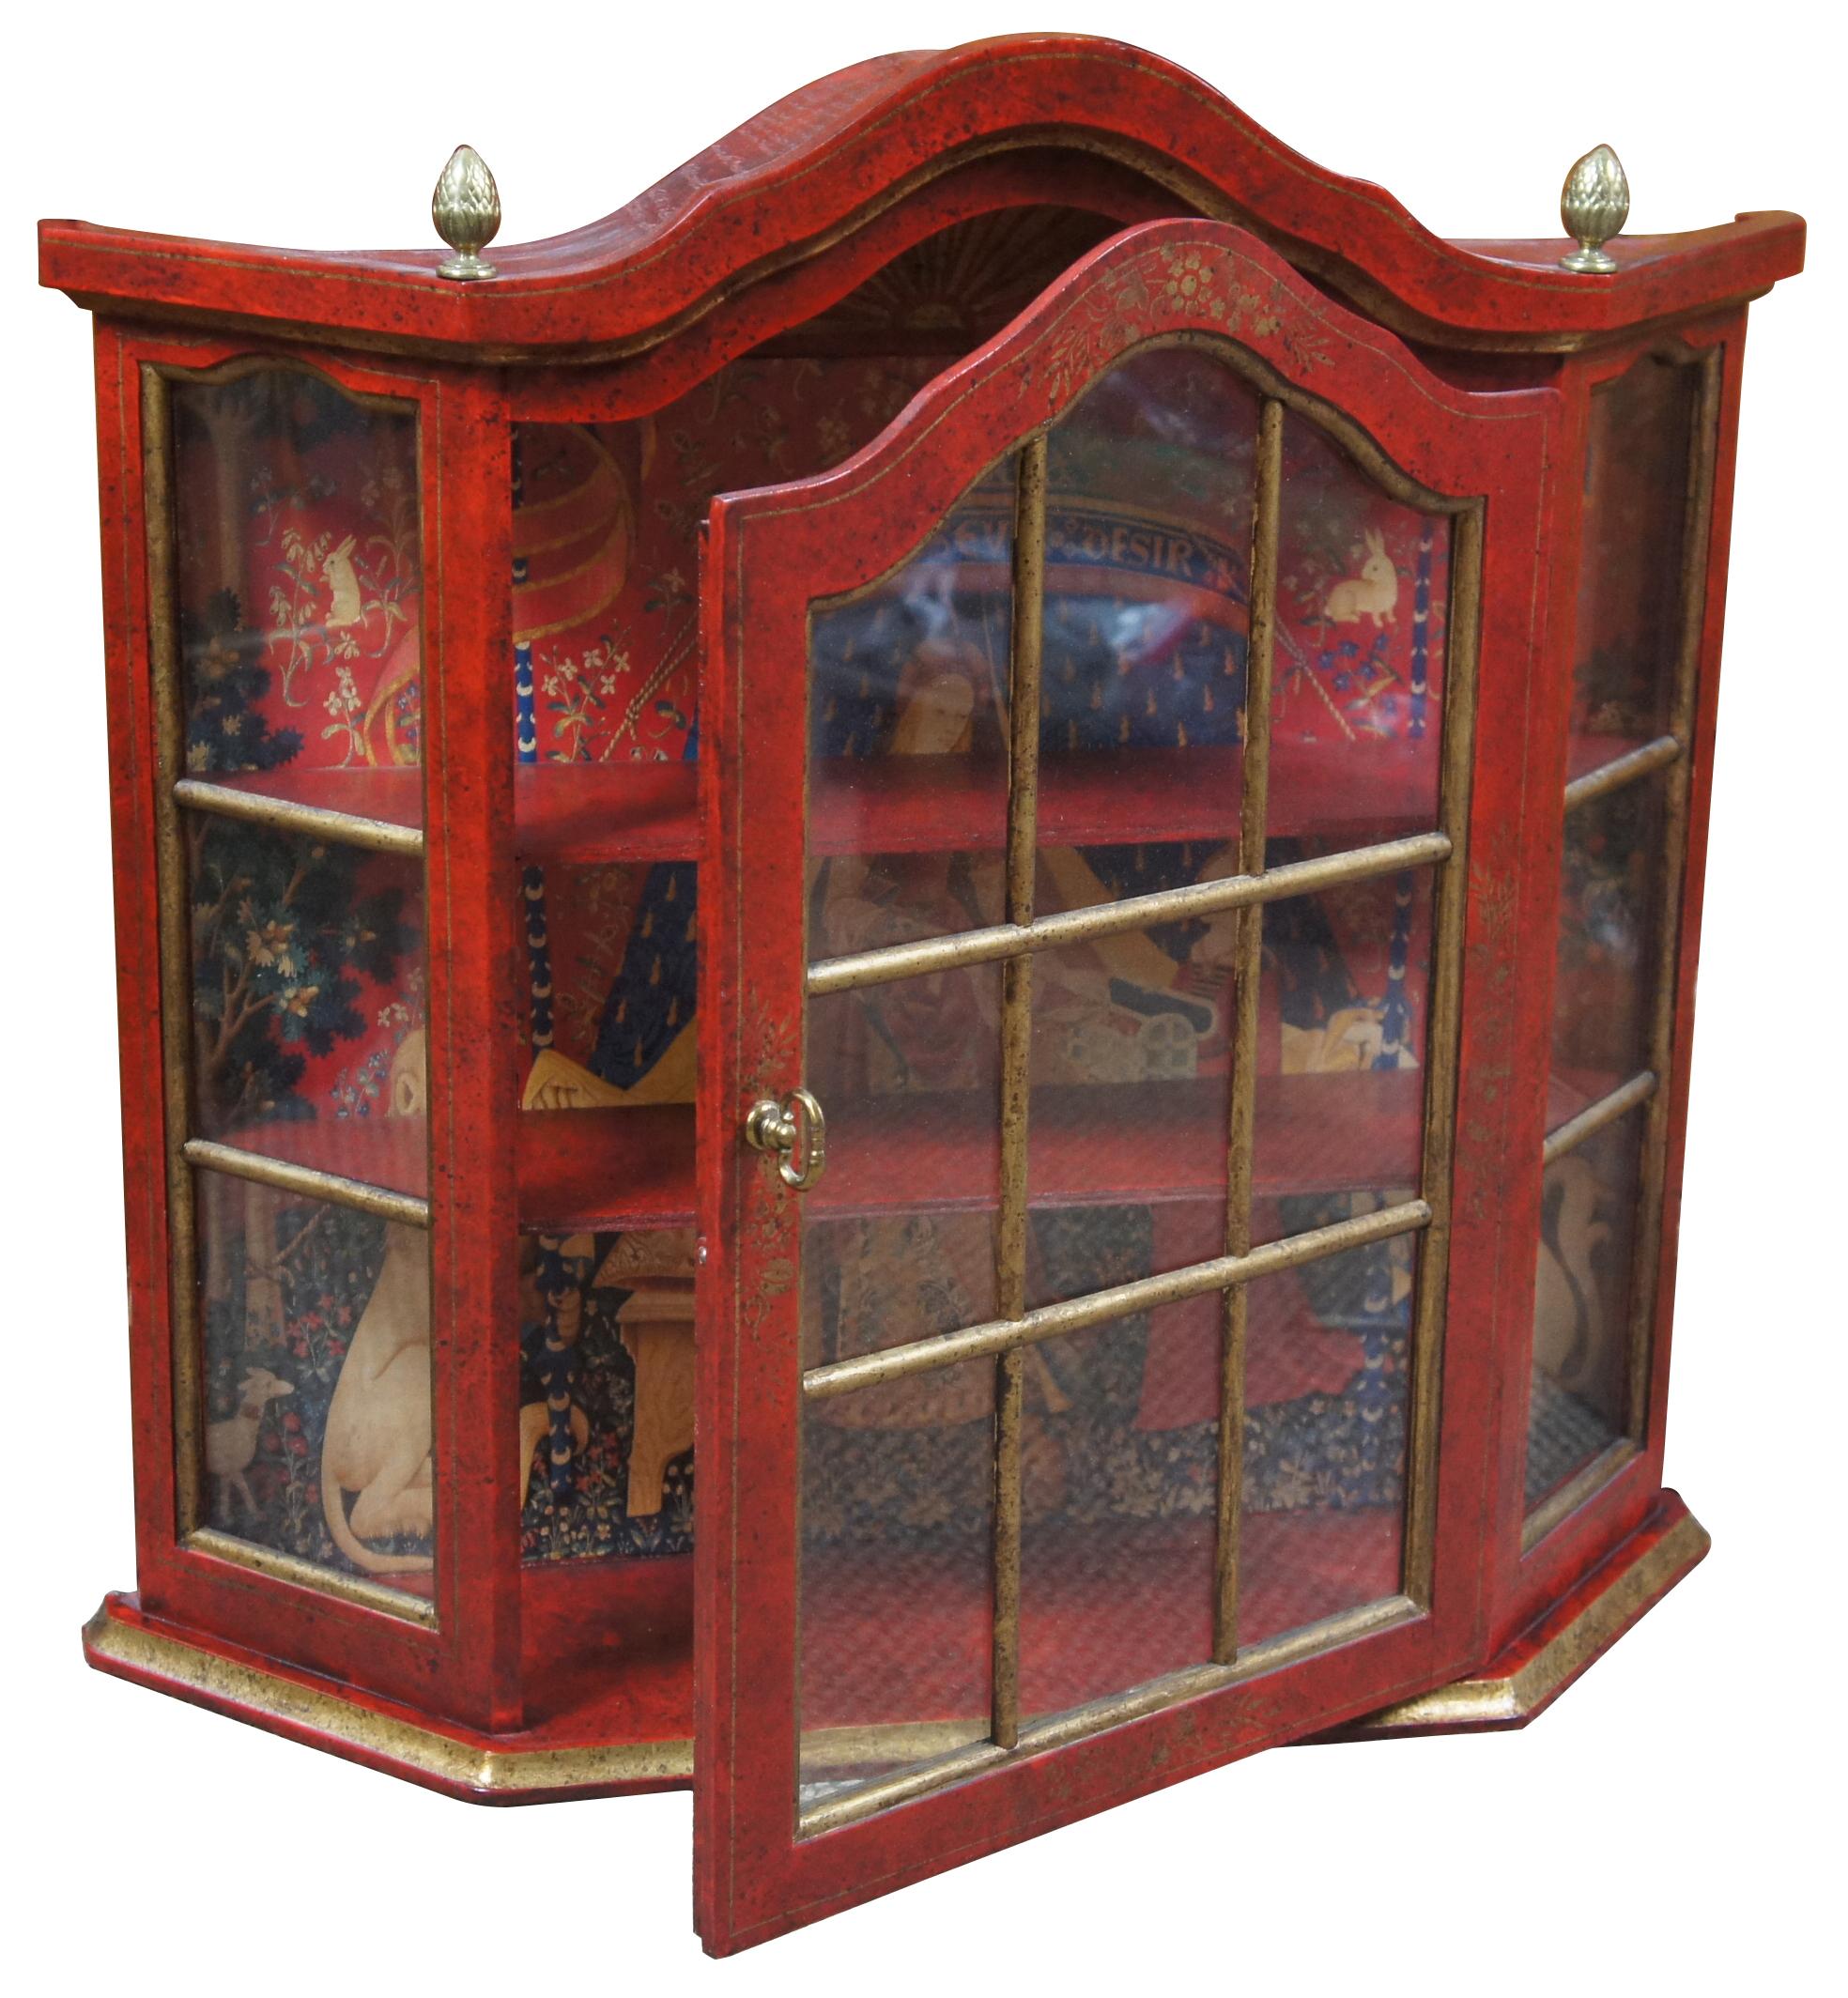 Vintage Red and Gold Distressed Wall Hanging Curio Cabinet